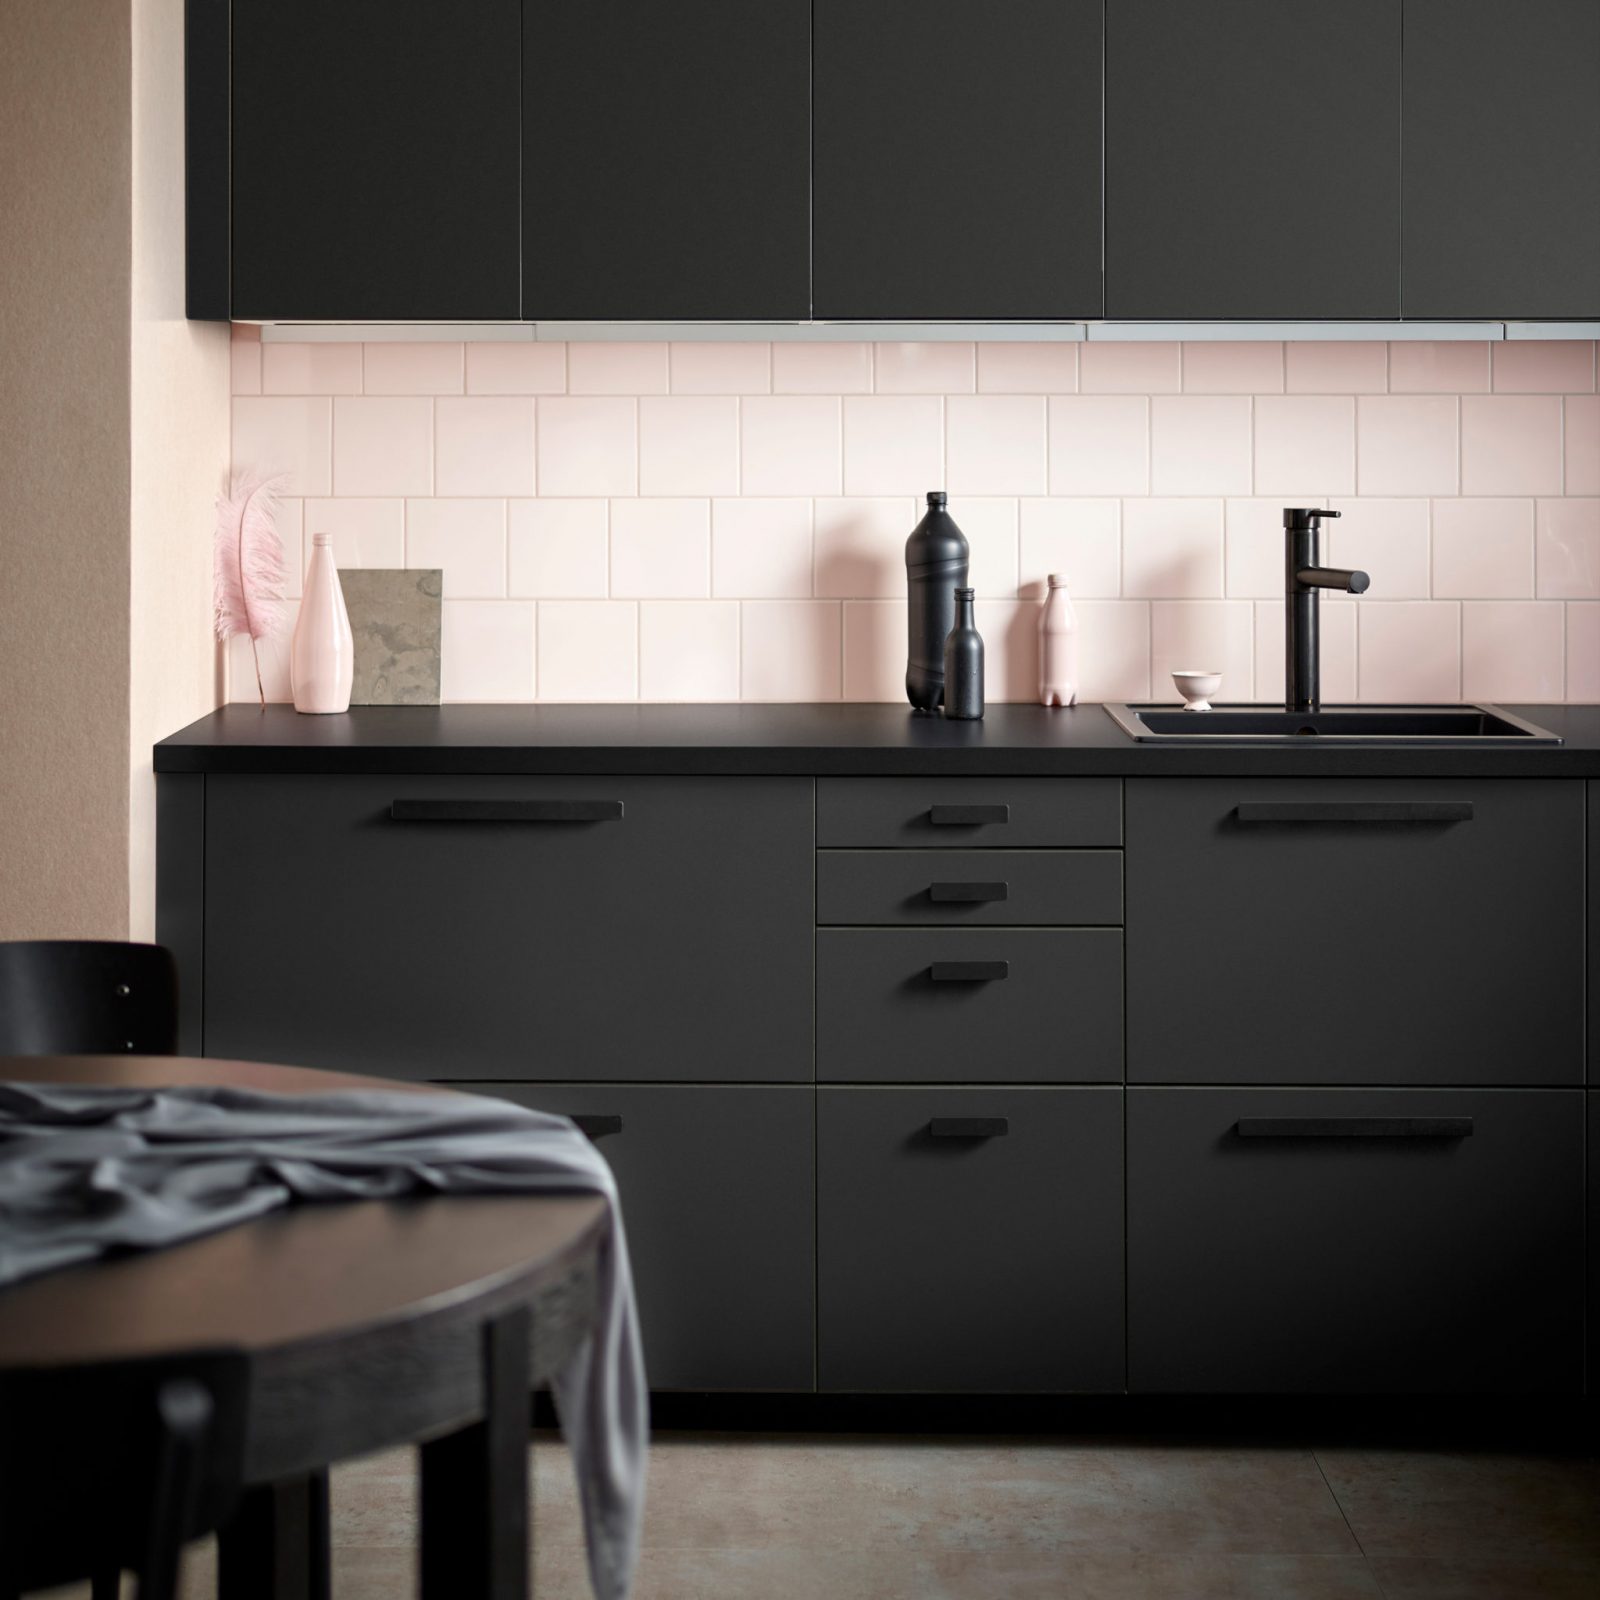 IKEA kitchen made from recycled plastic bottles created by Form Us With Love